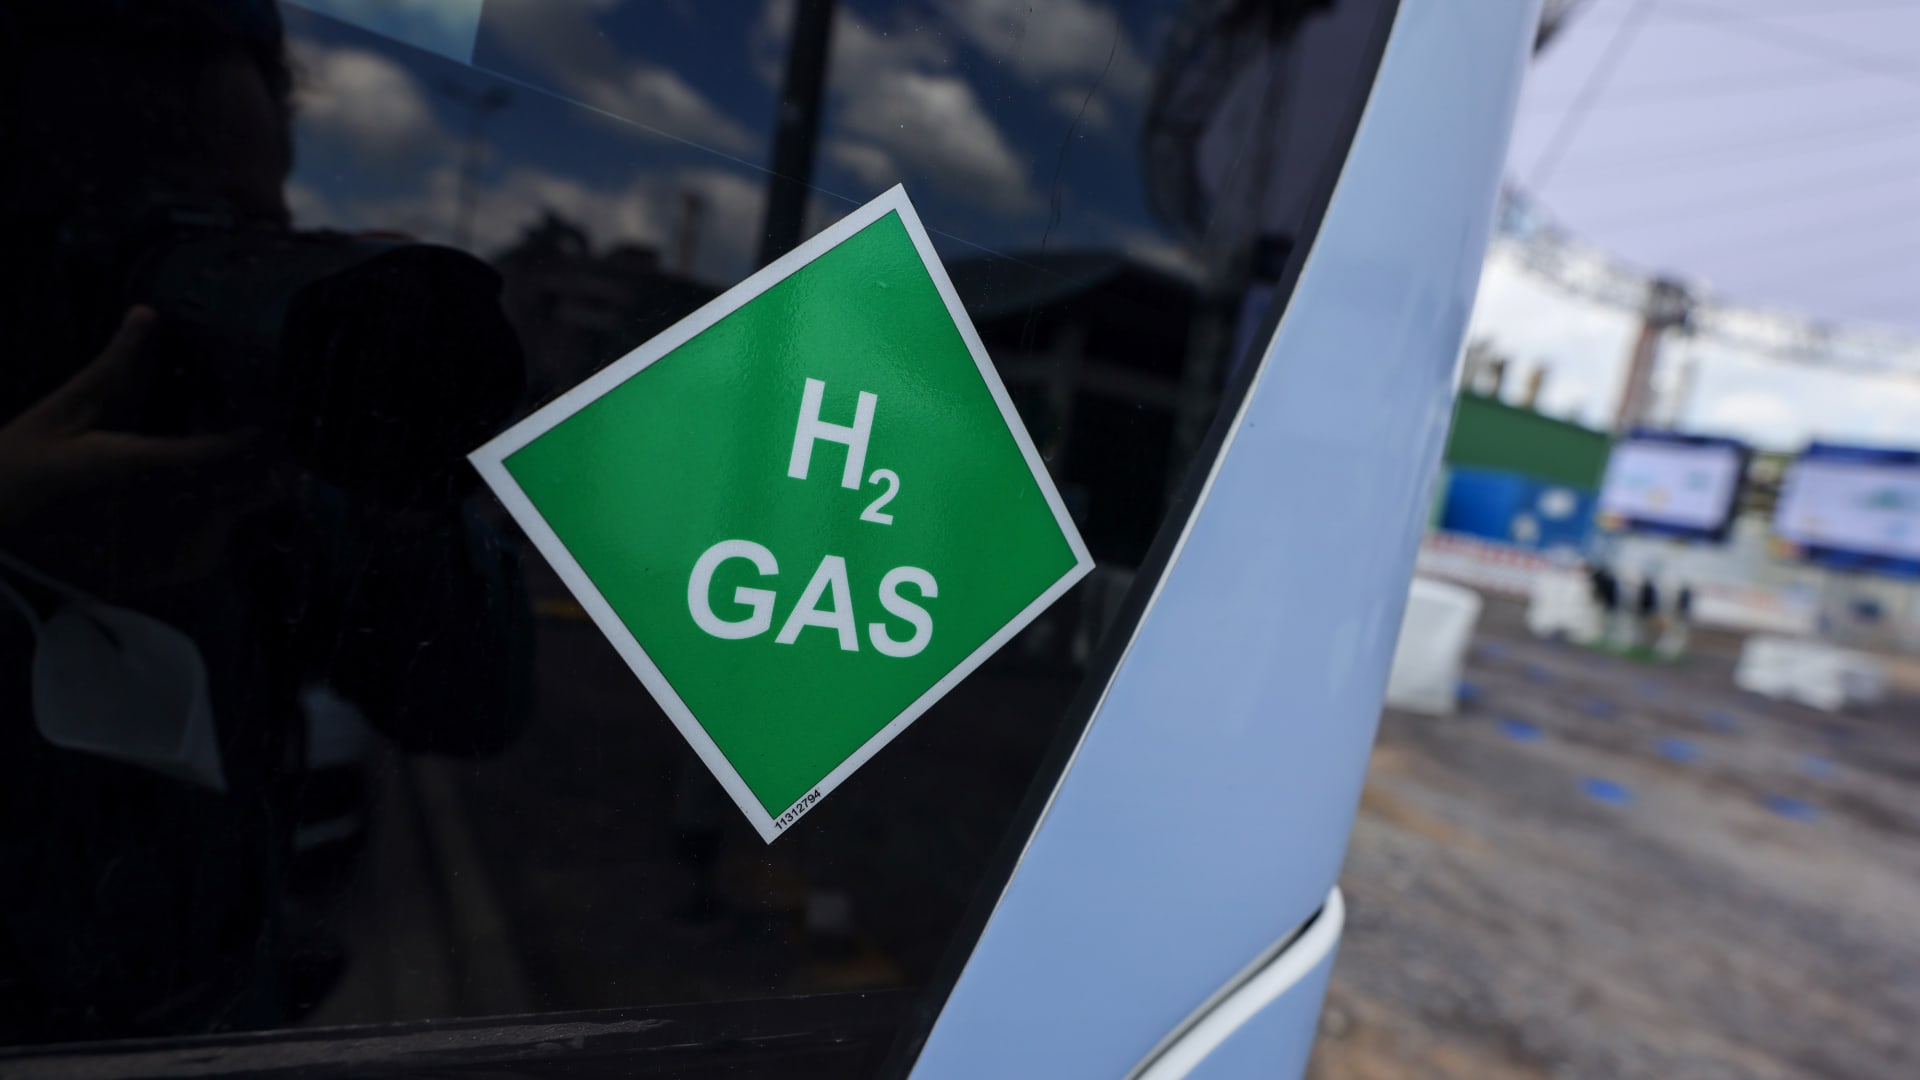 The race to make green hydrogen competitive is on. And Europe is building industrial-scale electrolyzers to help